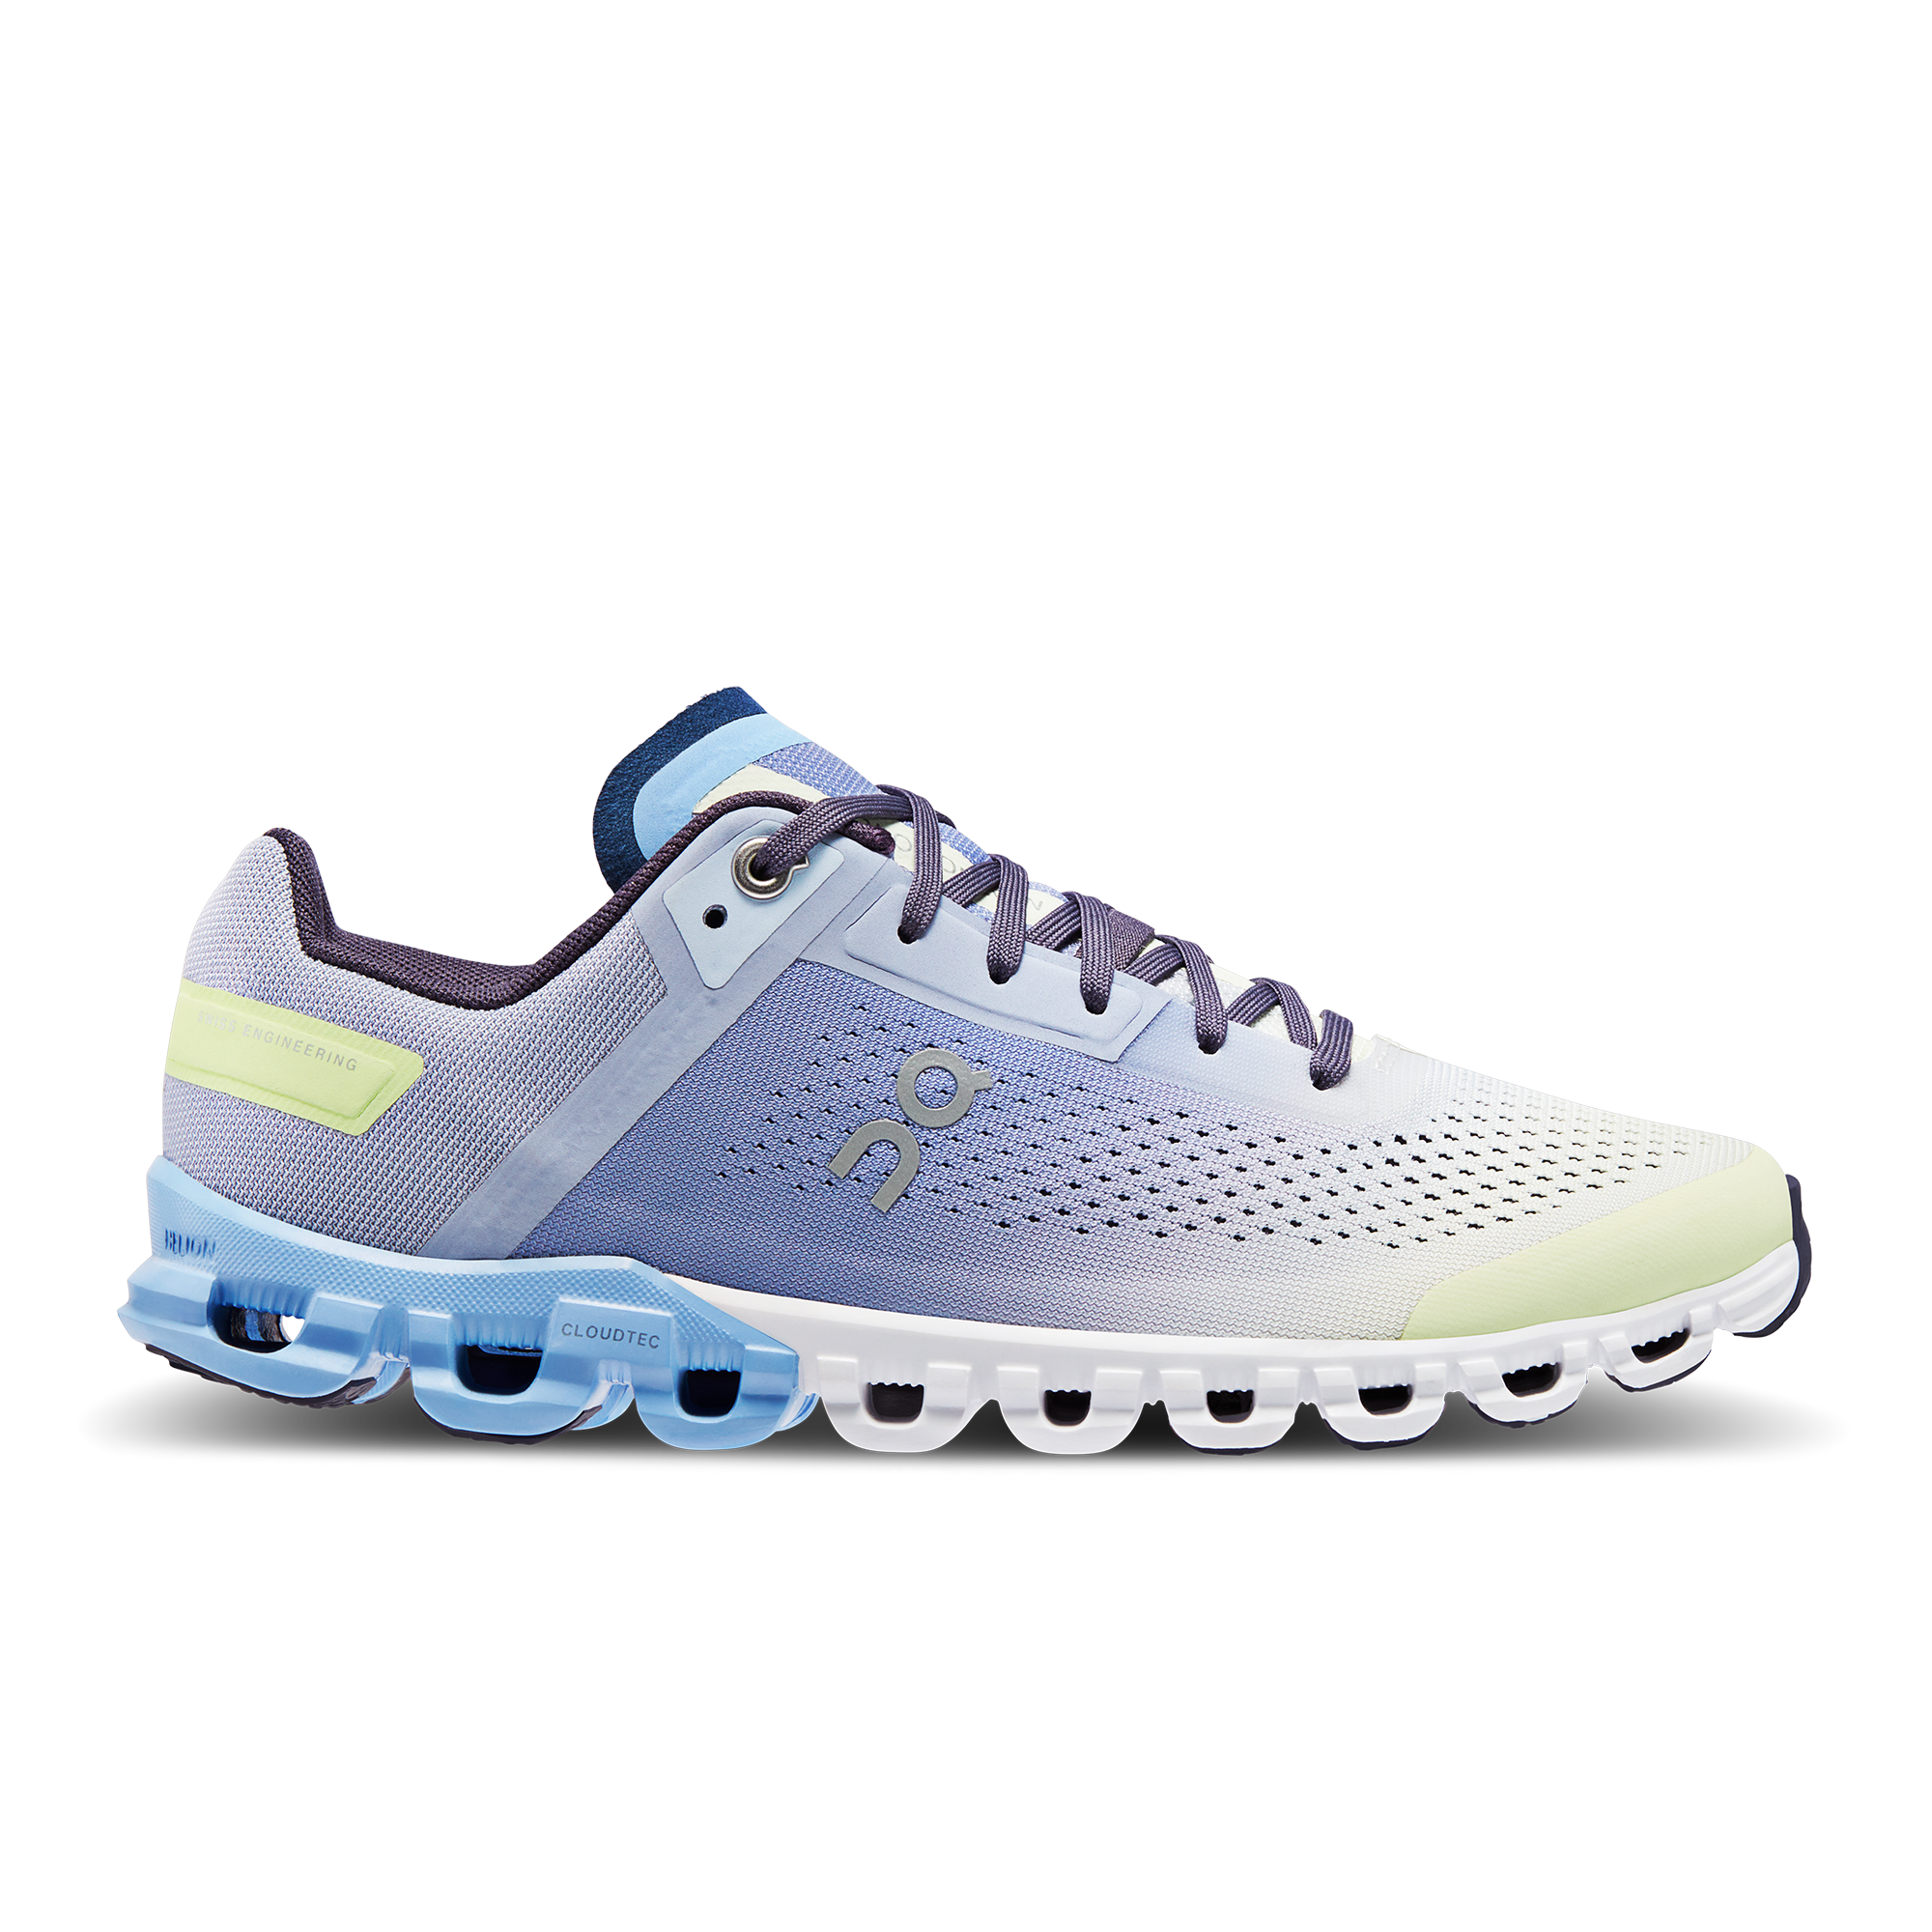 On Cloudflow 3.0 Ladies Running Shoes - Marina White/Blue Price & Deals -  Cycle Lab